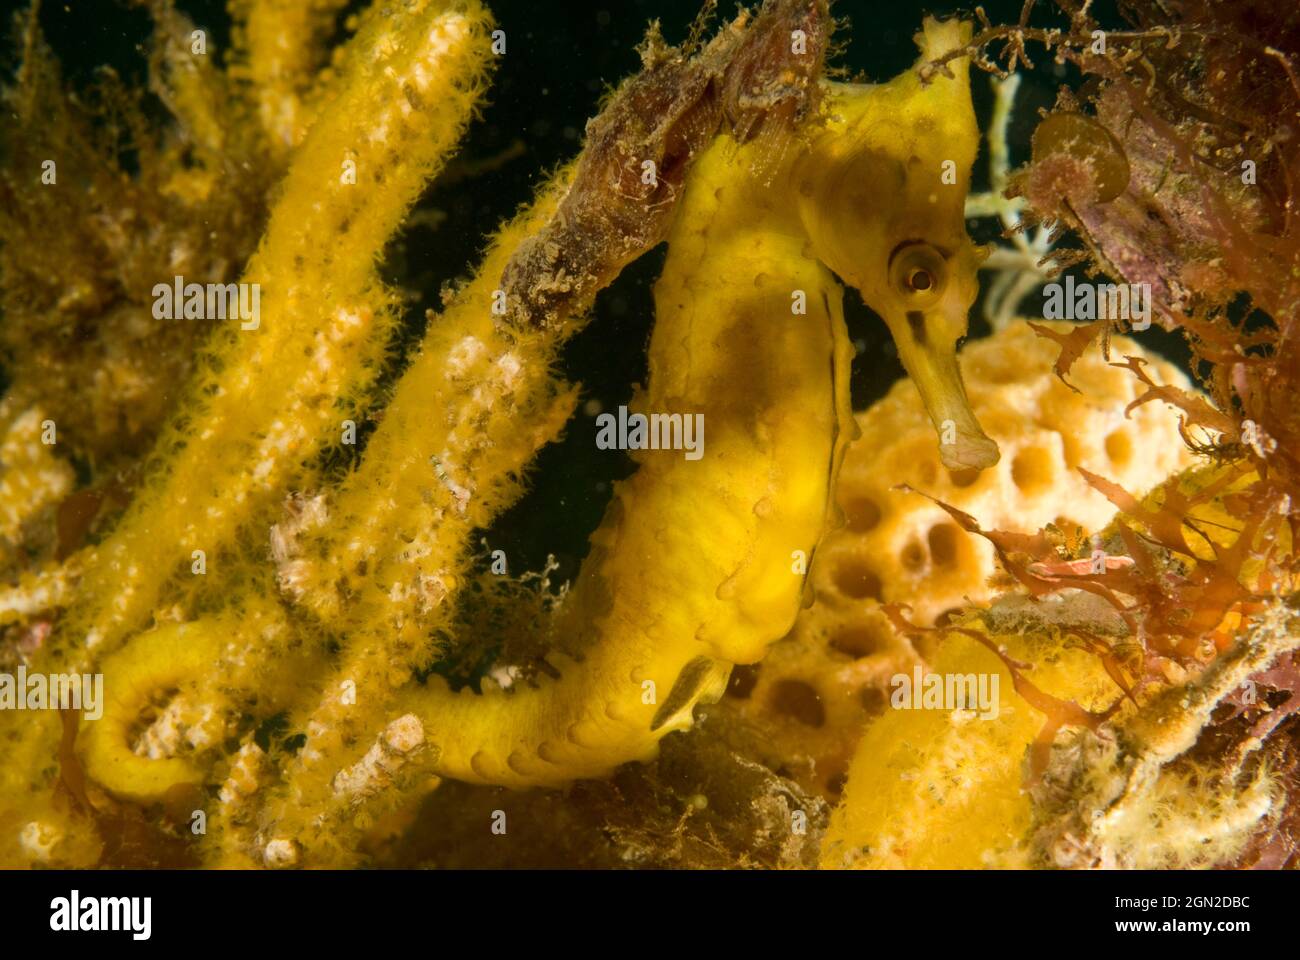 White’s seahorse (Hippocampus whitei), grows to 20 cms and is very common in Sydney Harbour, often found attached to rings of shark-proof swimming enc Stock Photo